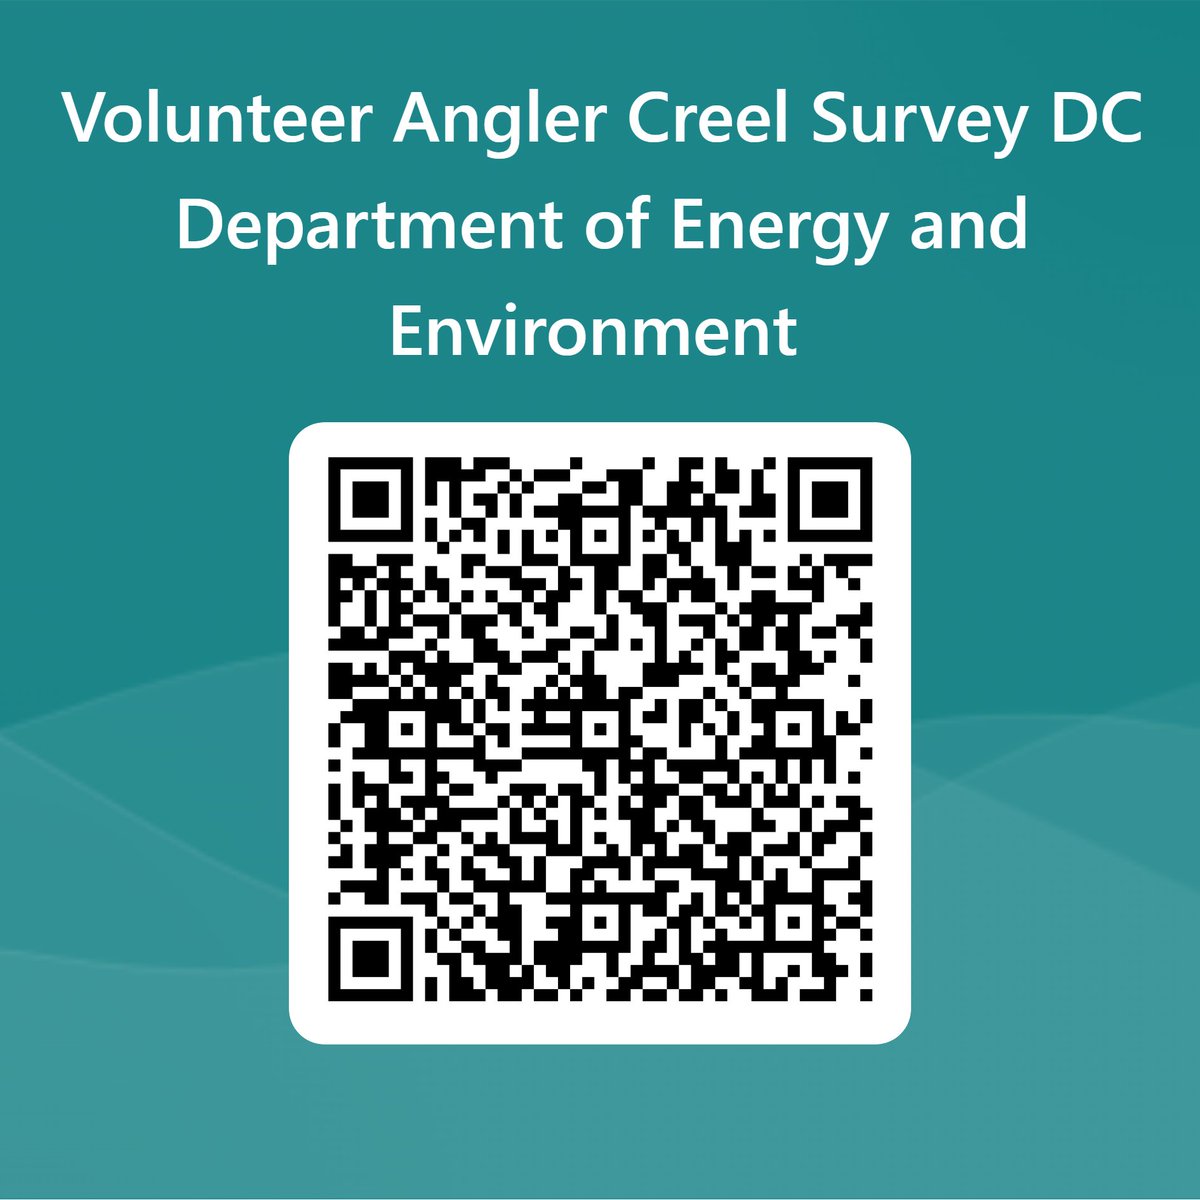 We're conducting our annual creel survey! Our goal is to better understand recreational angling efforts, perceptions, and harvests within the city. D.C. To access the survey, click the QR code! Good luck fishing and let us know how you do! (Read caption for more info!)